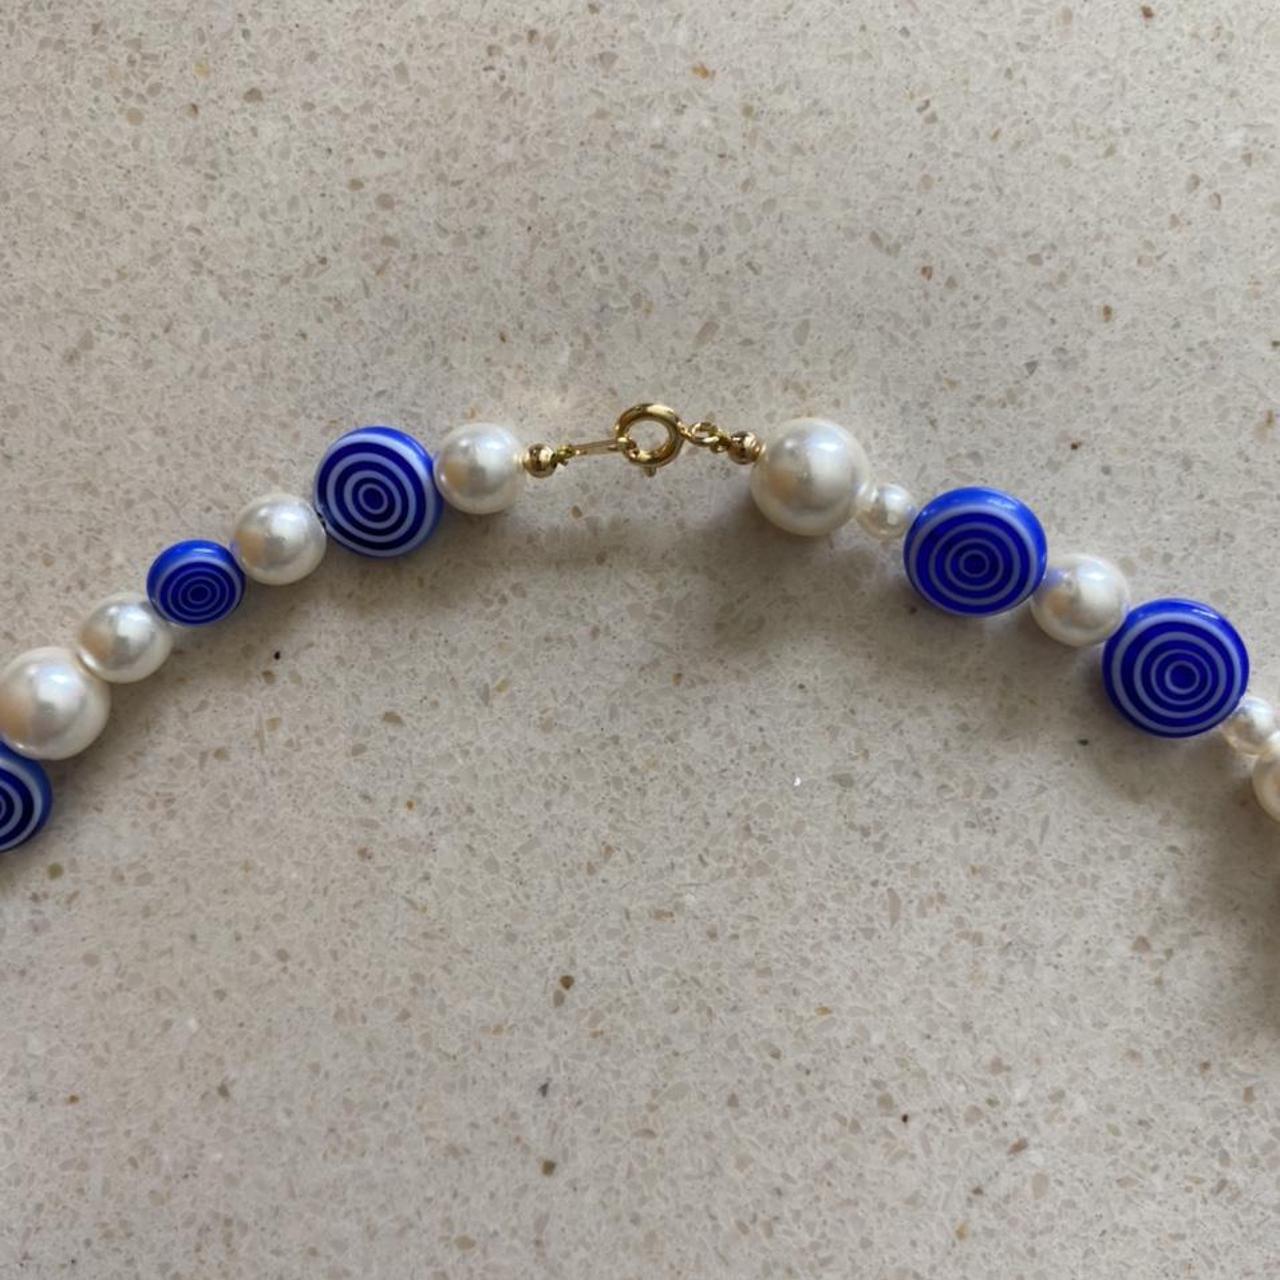 Women's White and Blue Jewellery (3)